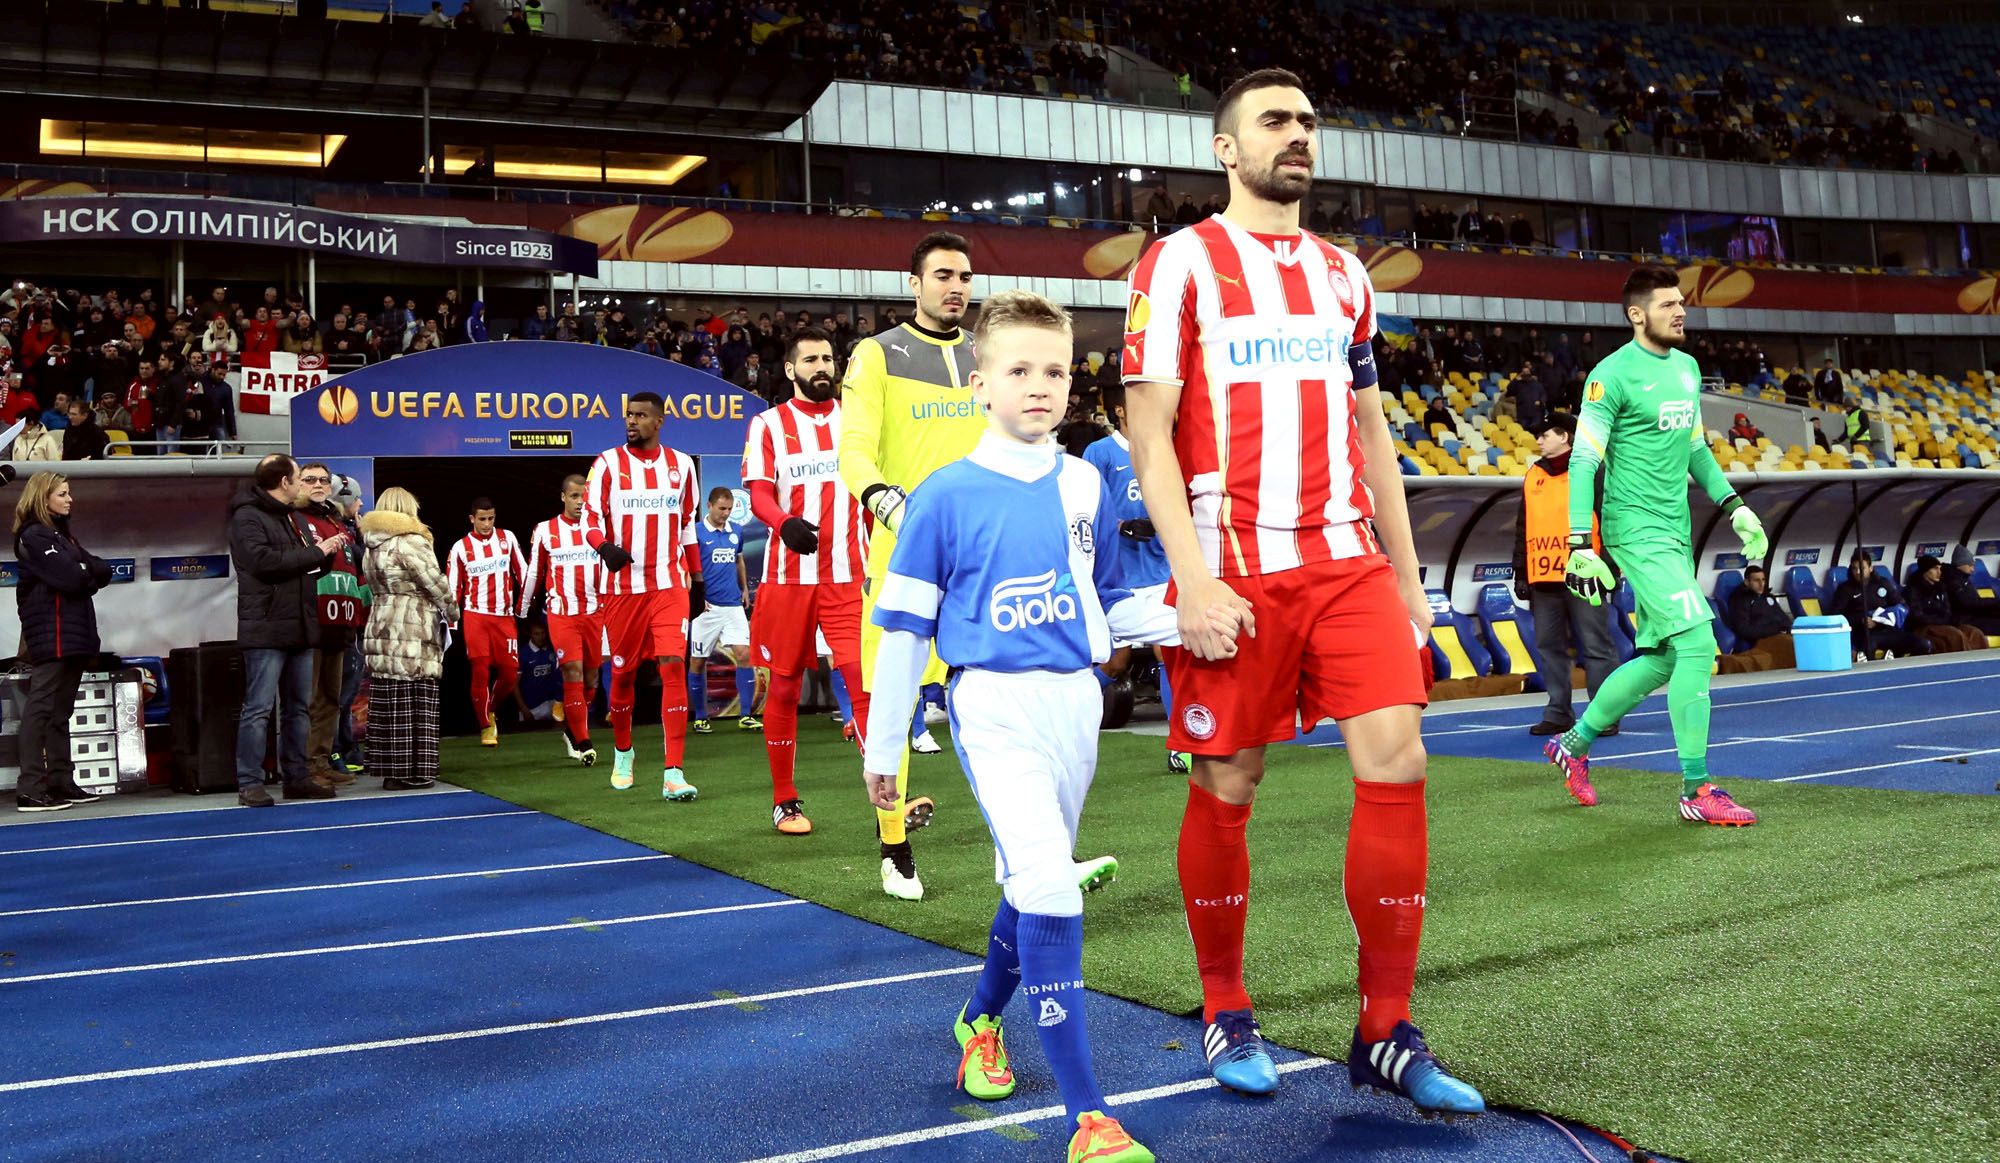 Dnipro – Olympiacos 2-0